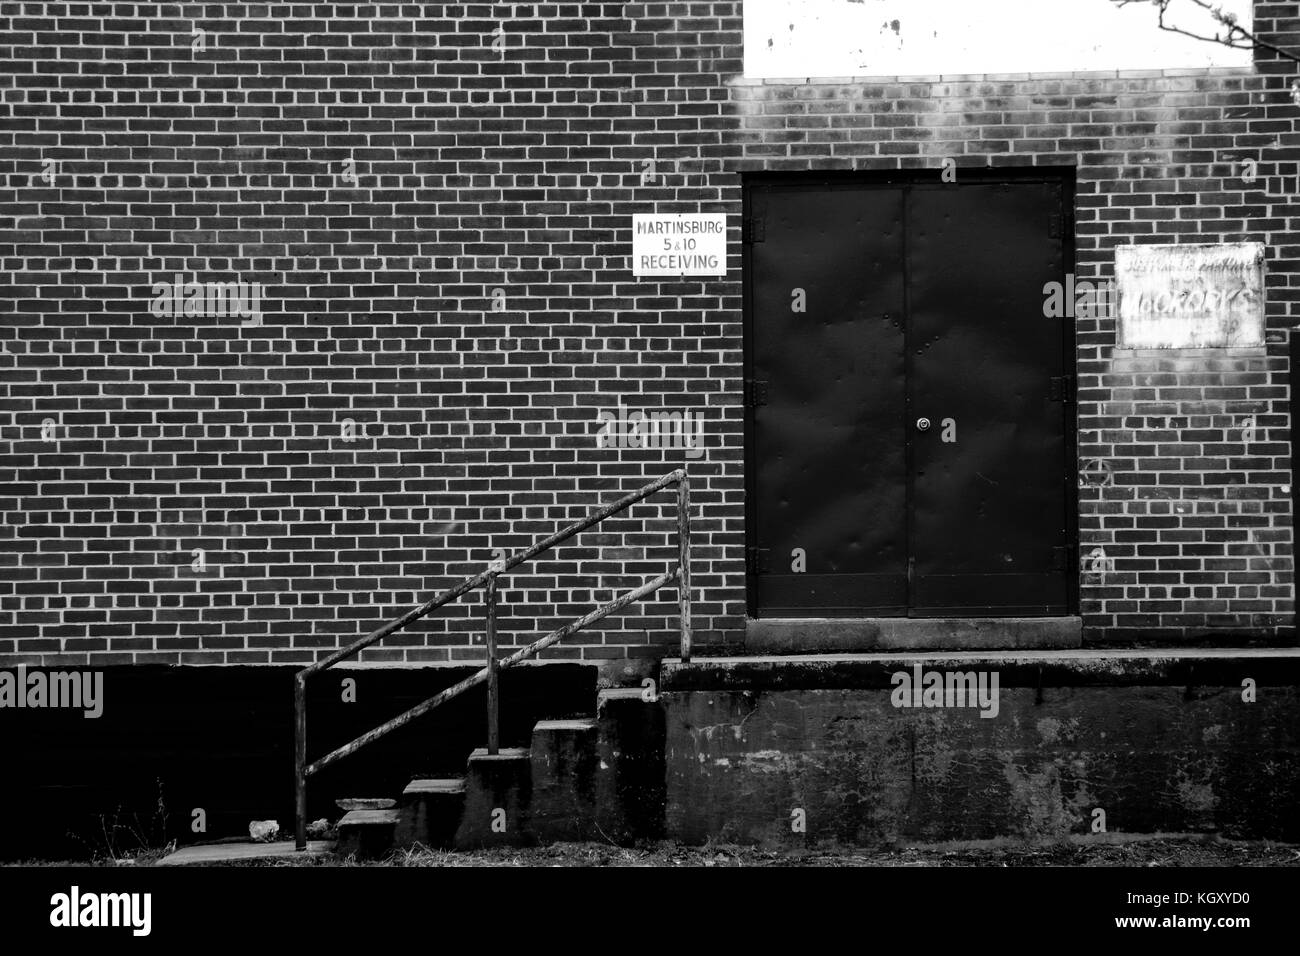 A loading dock behind a row of old storefronts in Martinsburg, West Virginia. Taken in black and white. Stock Photo